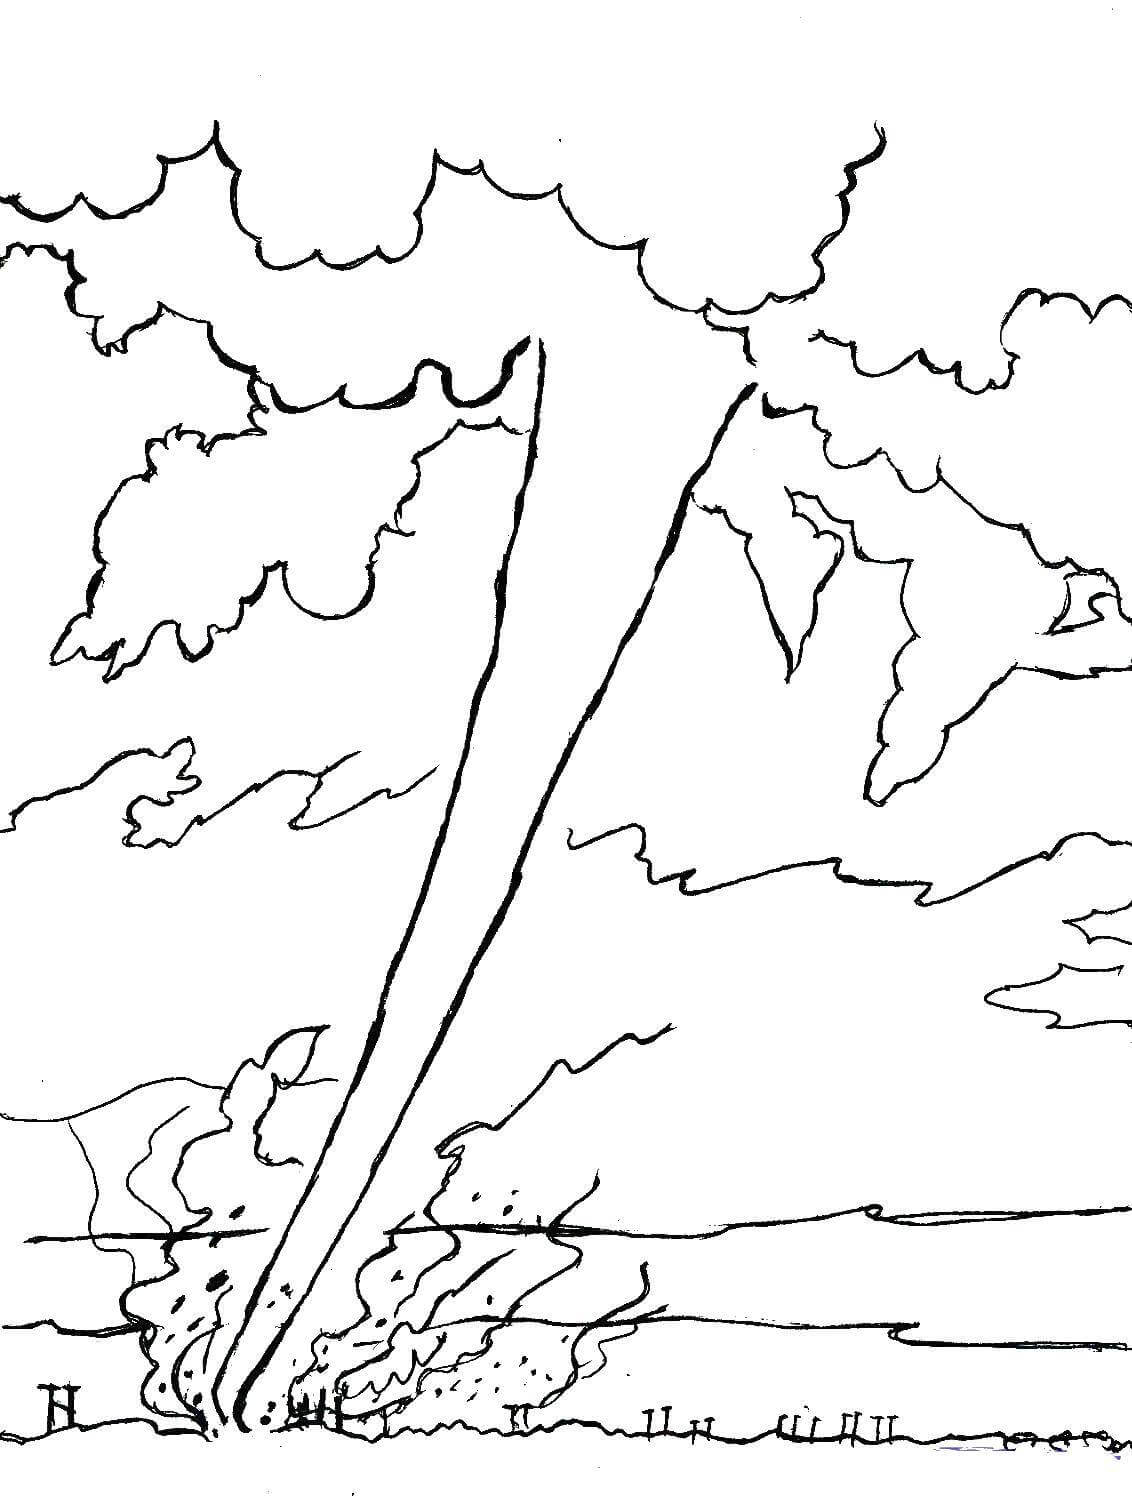 Tornade 3 coloring page